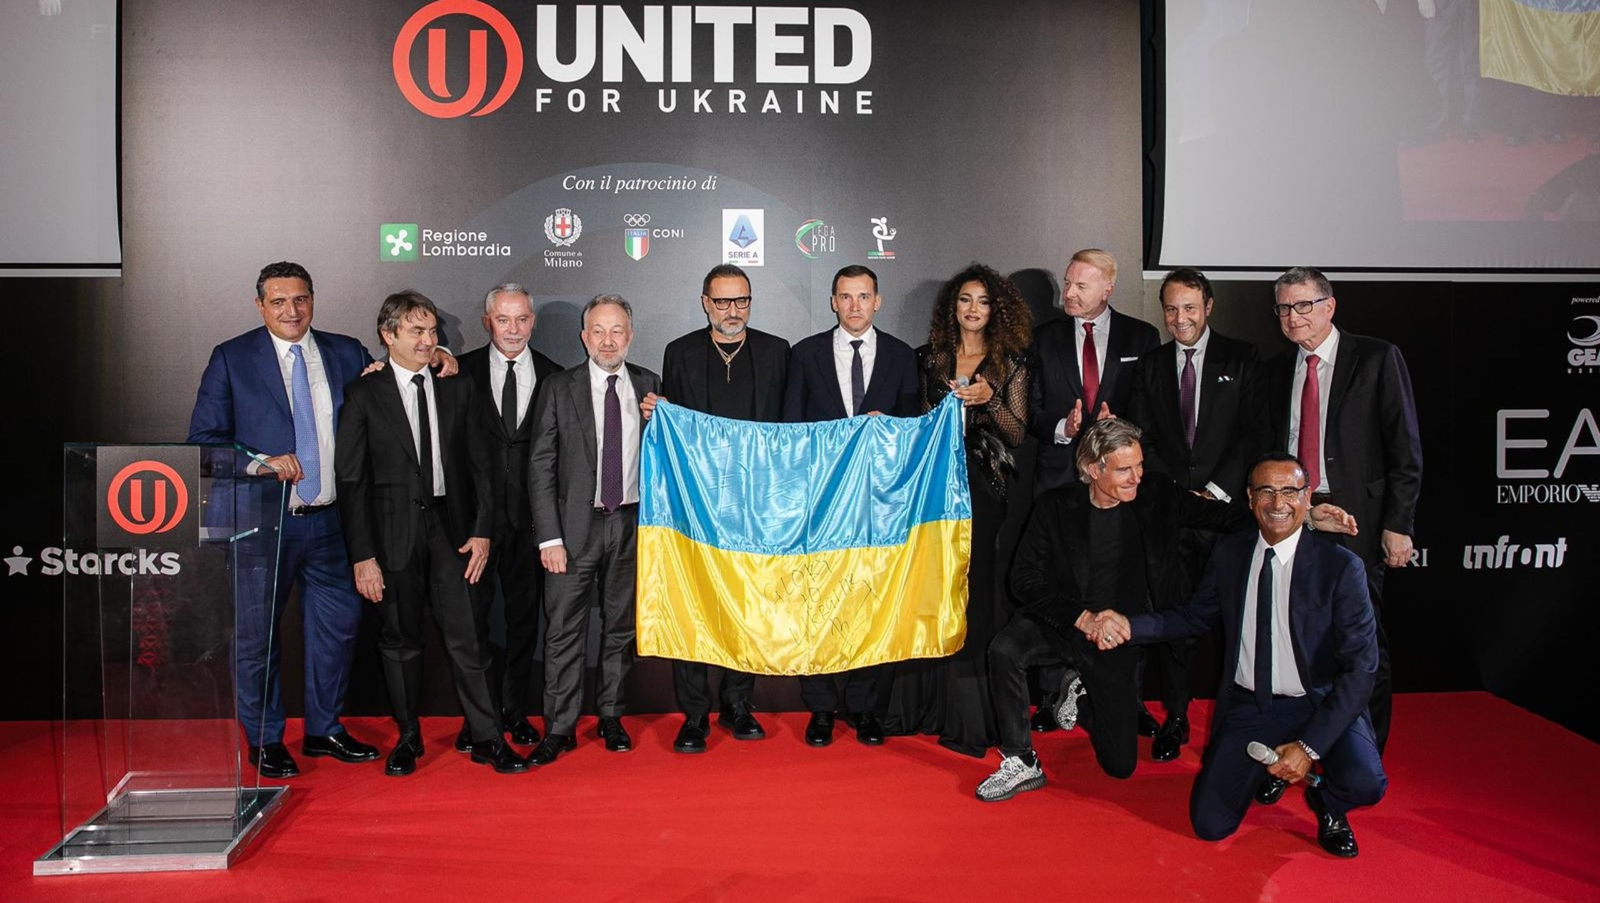 The Flag Signed by the President of Ukraine was Sold for 110,000 Euros